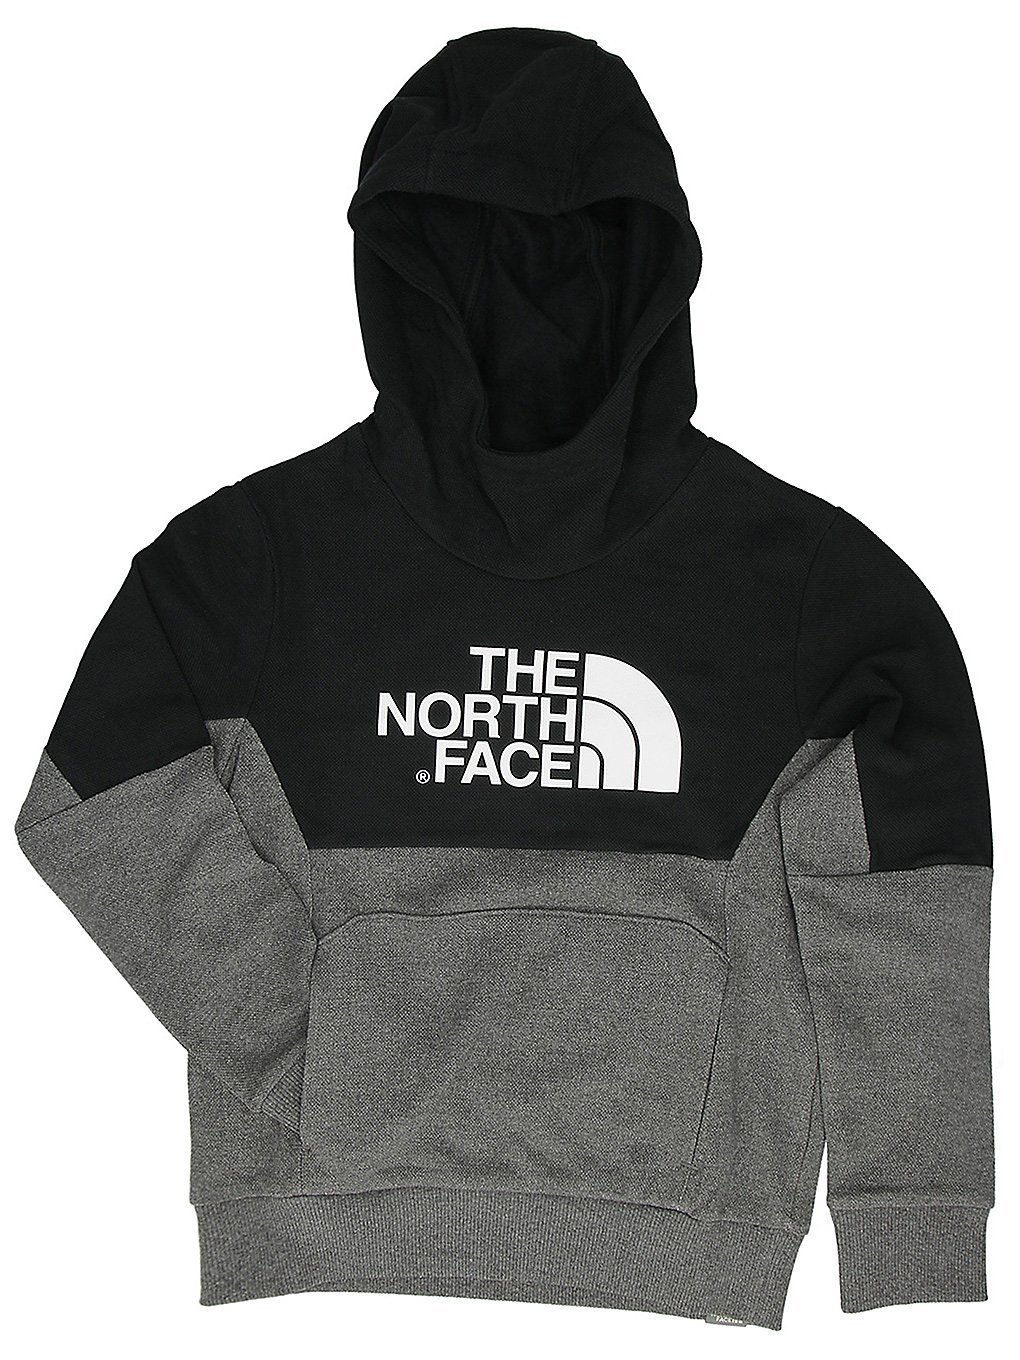 The north face south peak hoodie harmaa, the north face